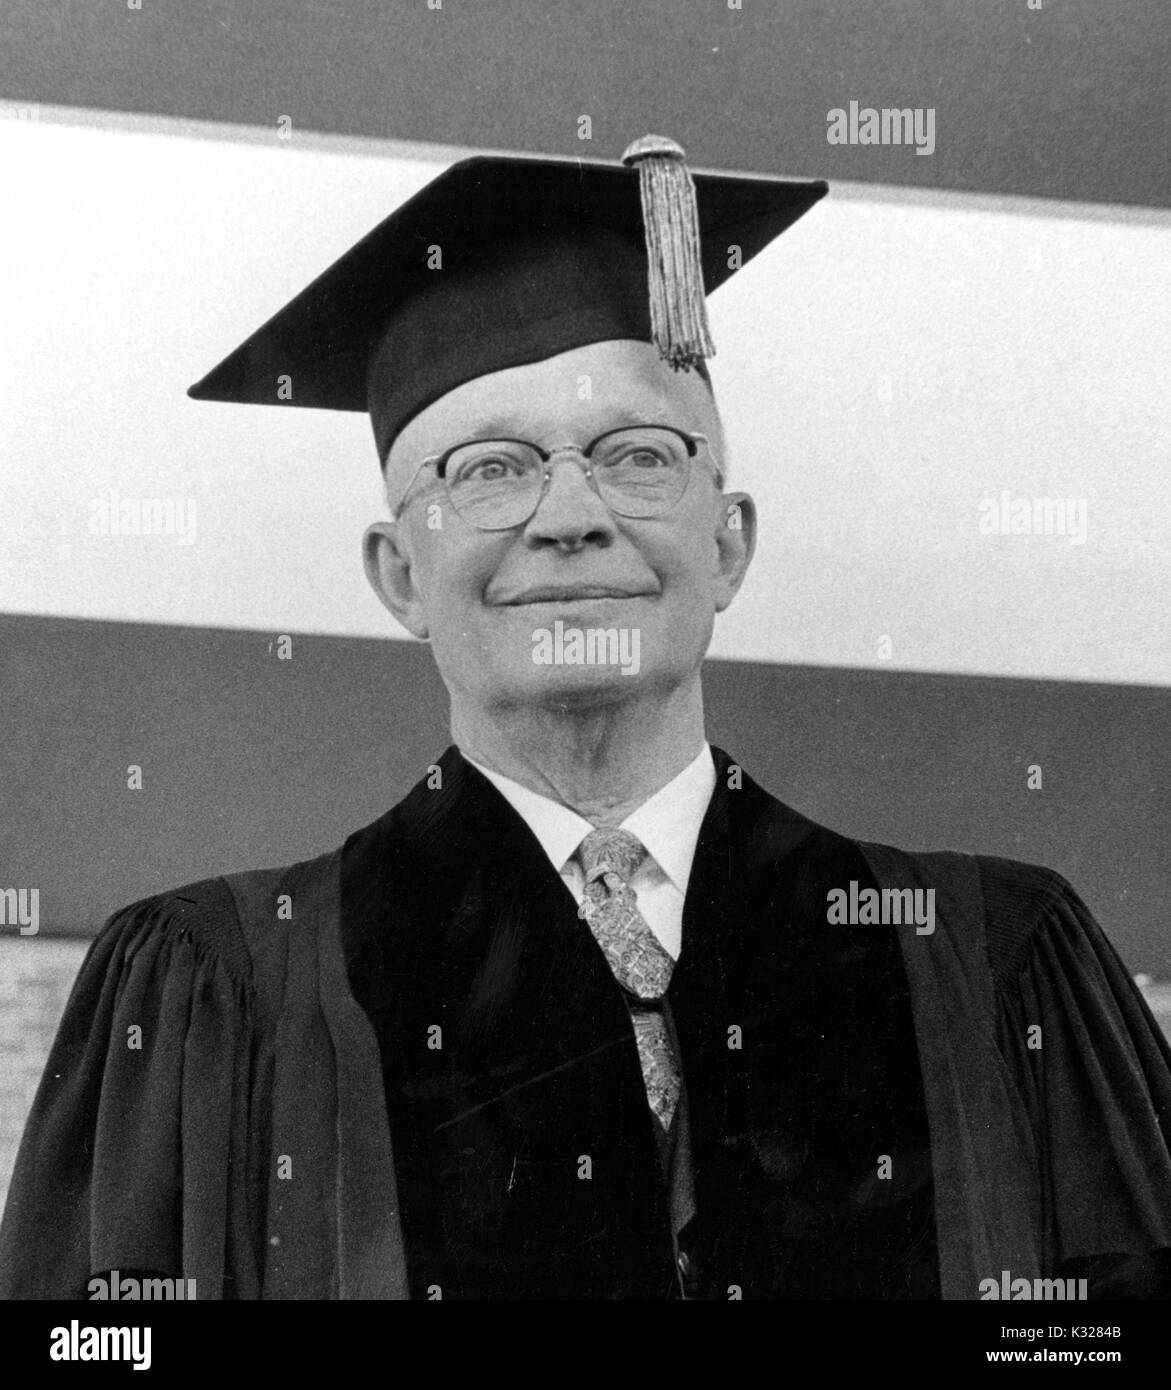 Former President of the United States Dwight D. Eisenhower in academic robes in Shriver Hall of the Johns Hopkins University in Baltimore, Maryland, 1967. Stock Photo